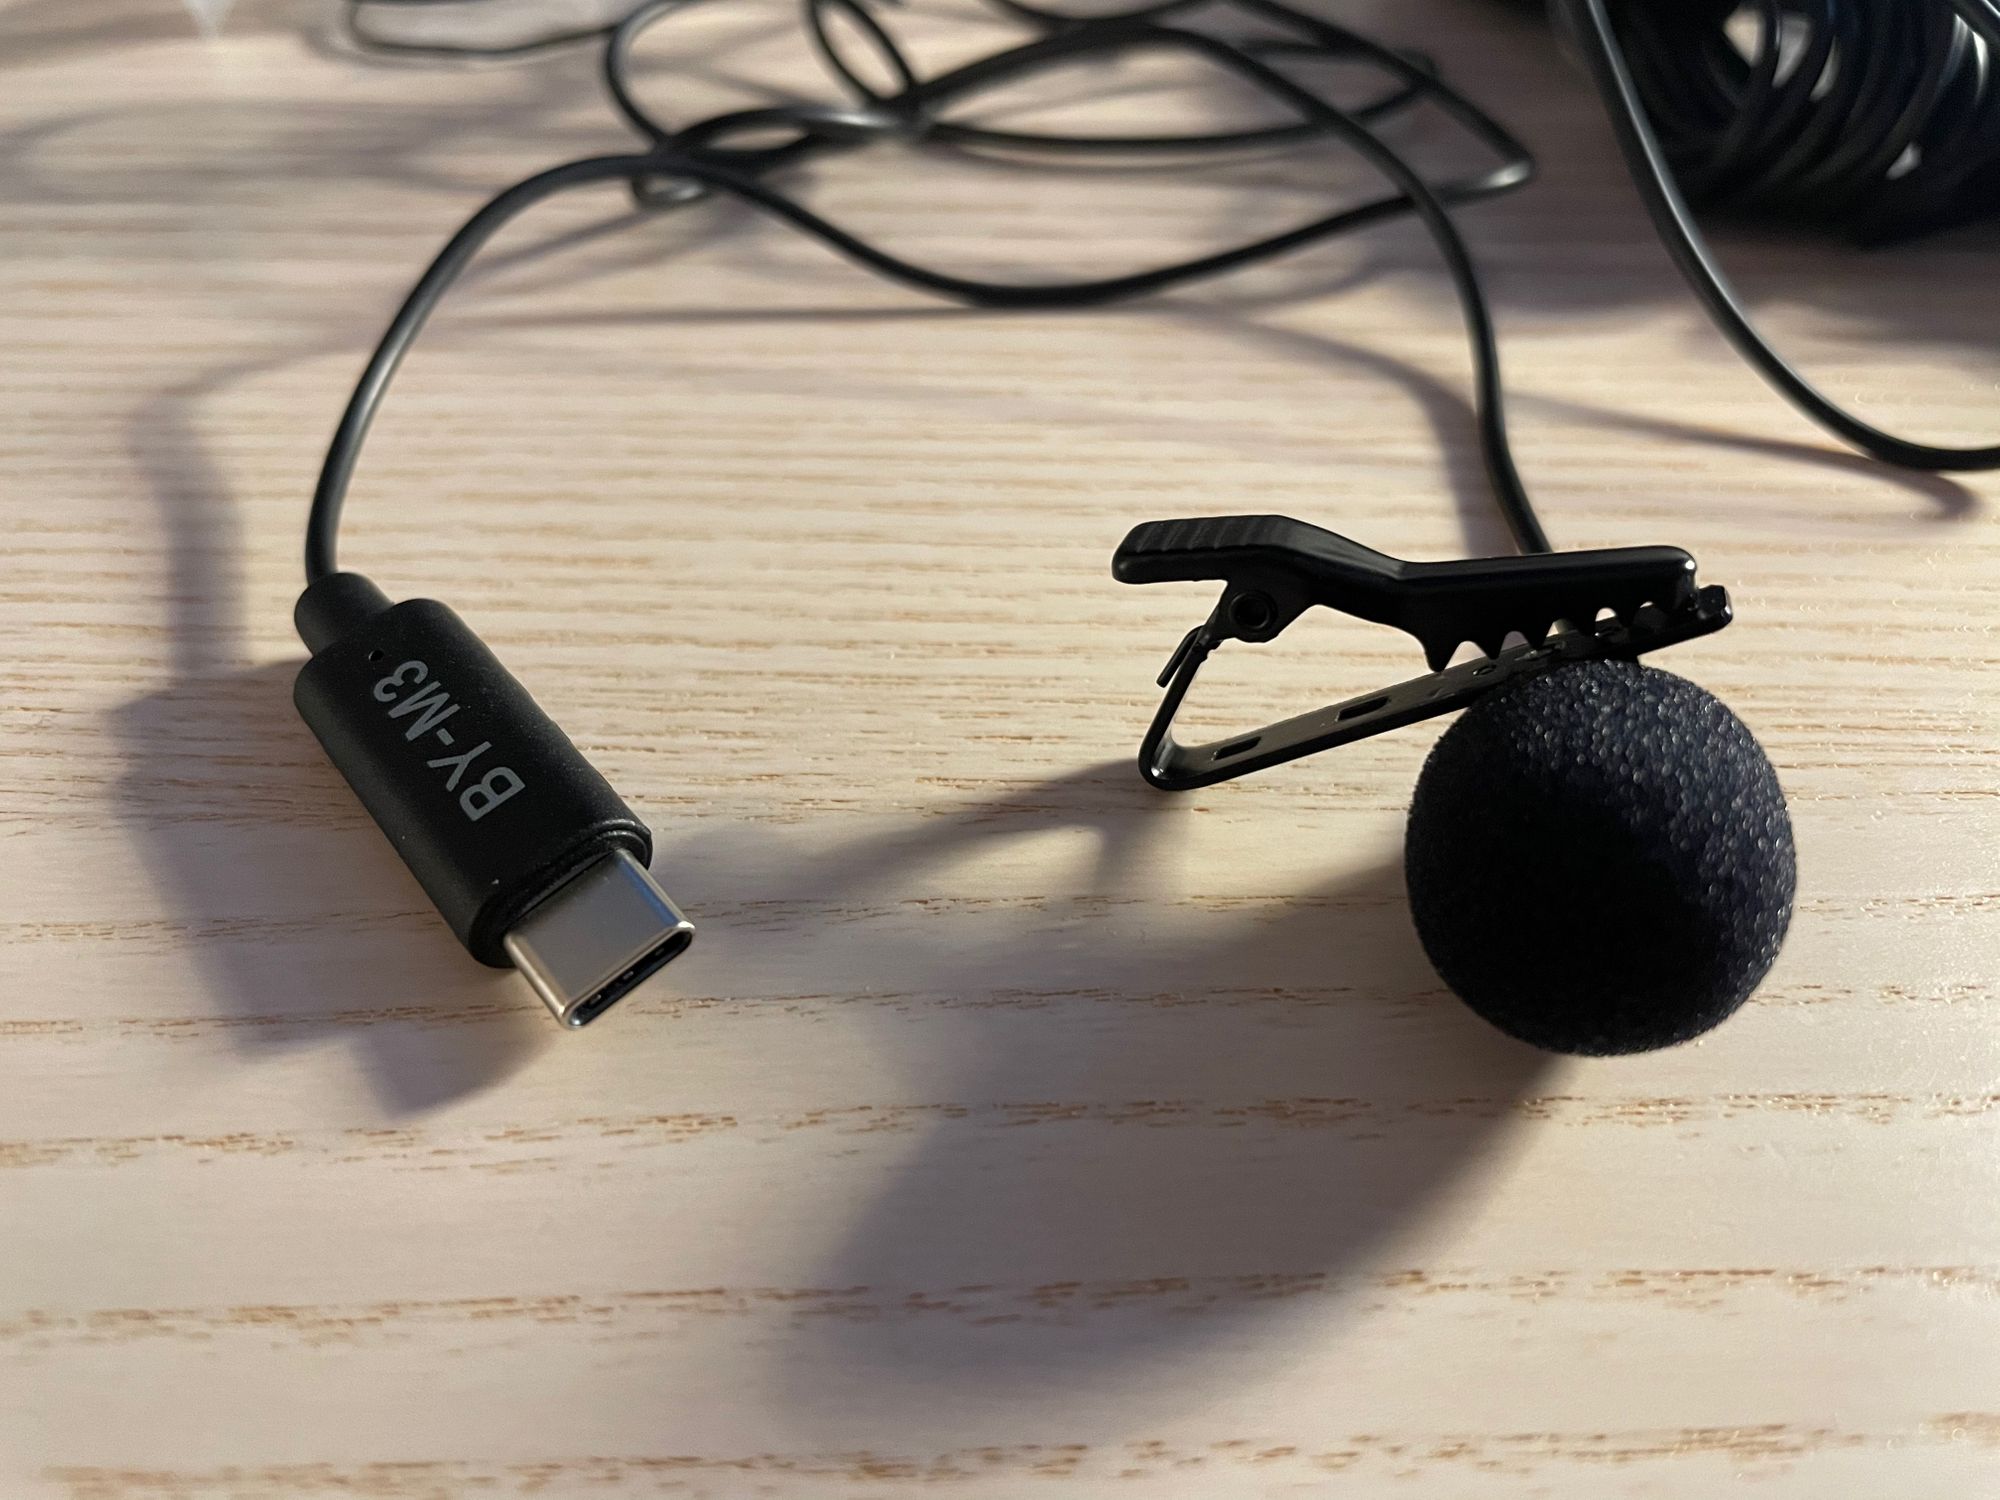 I prefered a lavalier microphone for screencast. Hands free, close to the source of the sound.